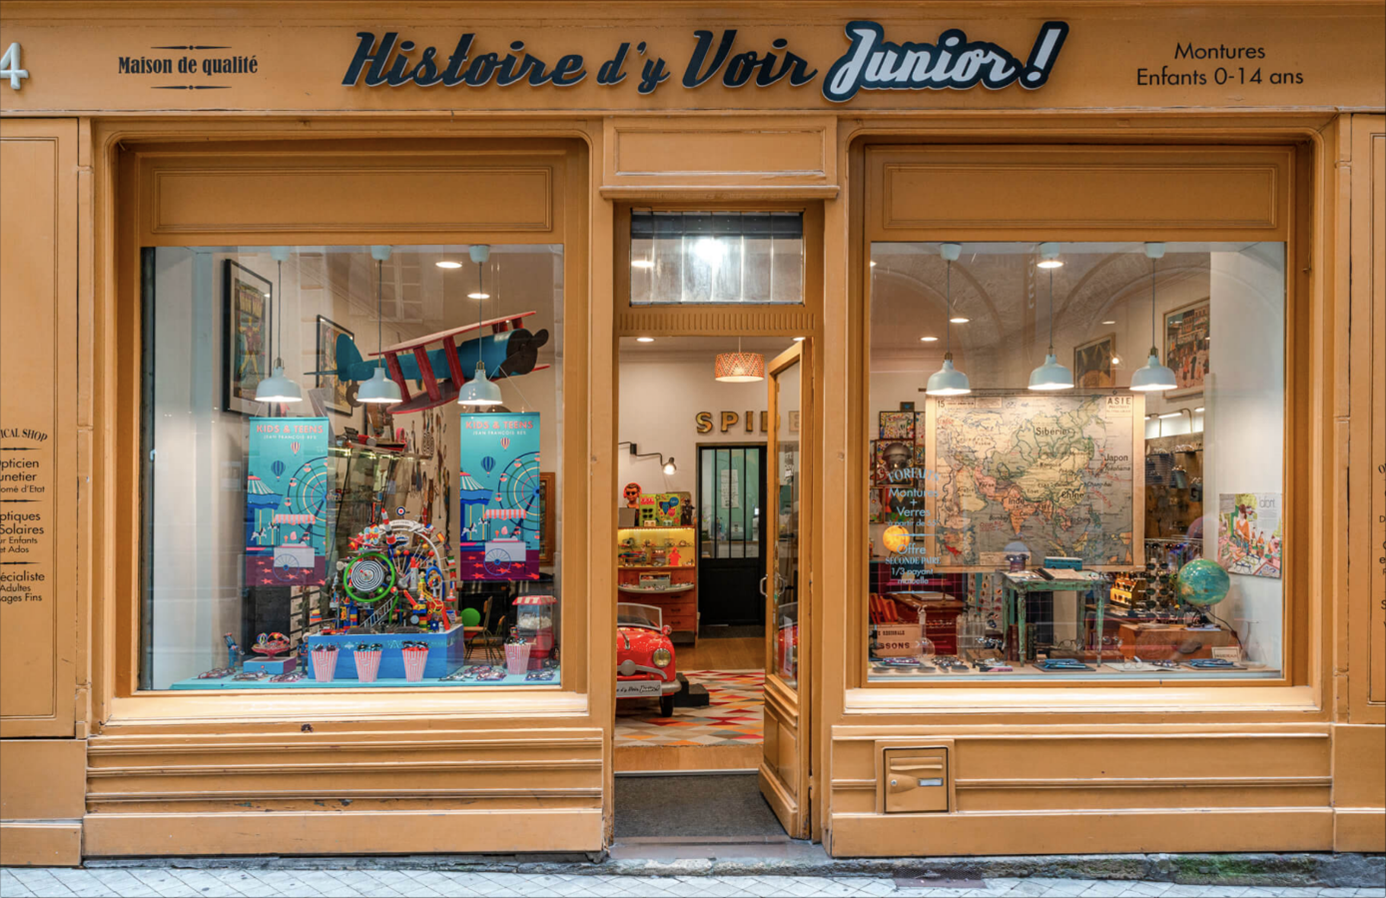 The 5 Most Beautiful Storefronts in France